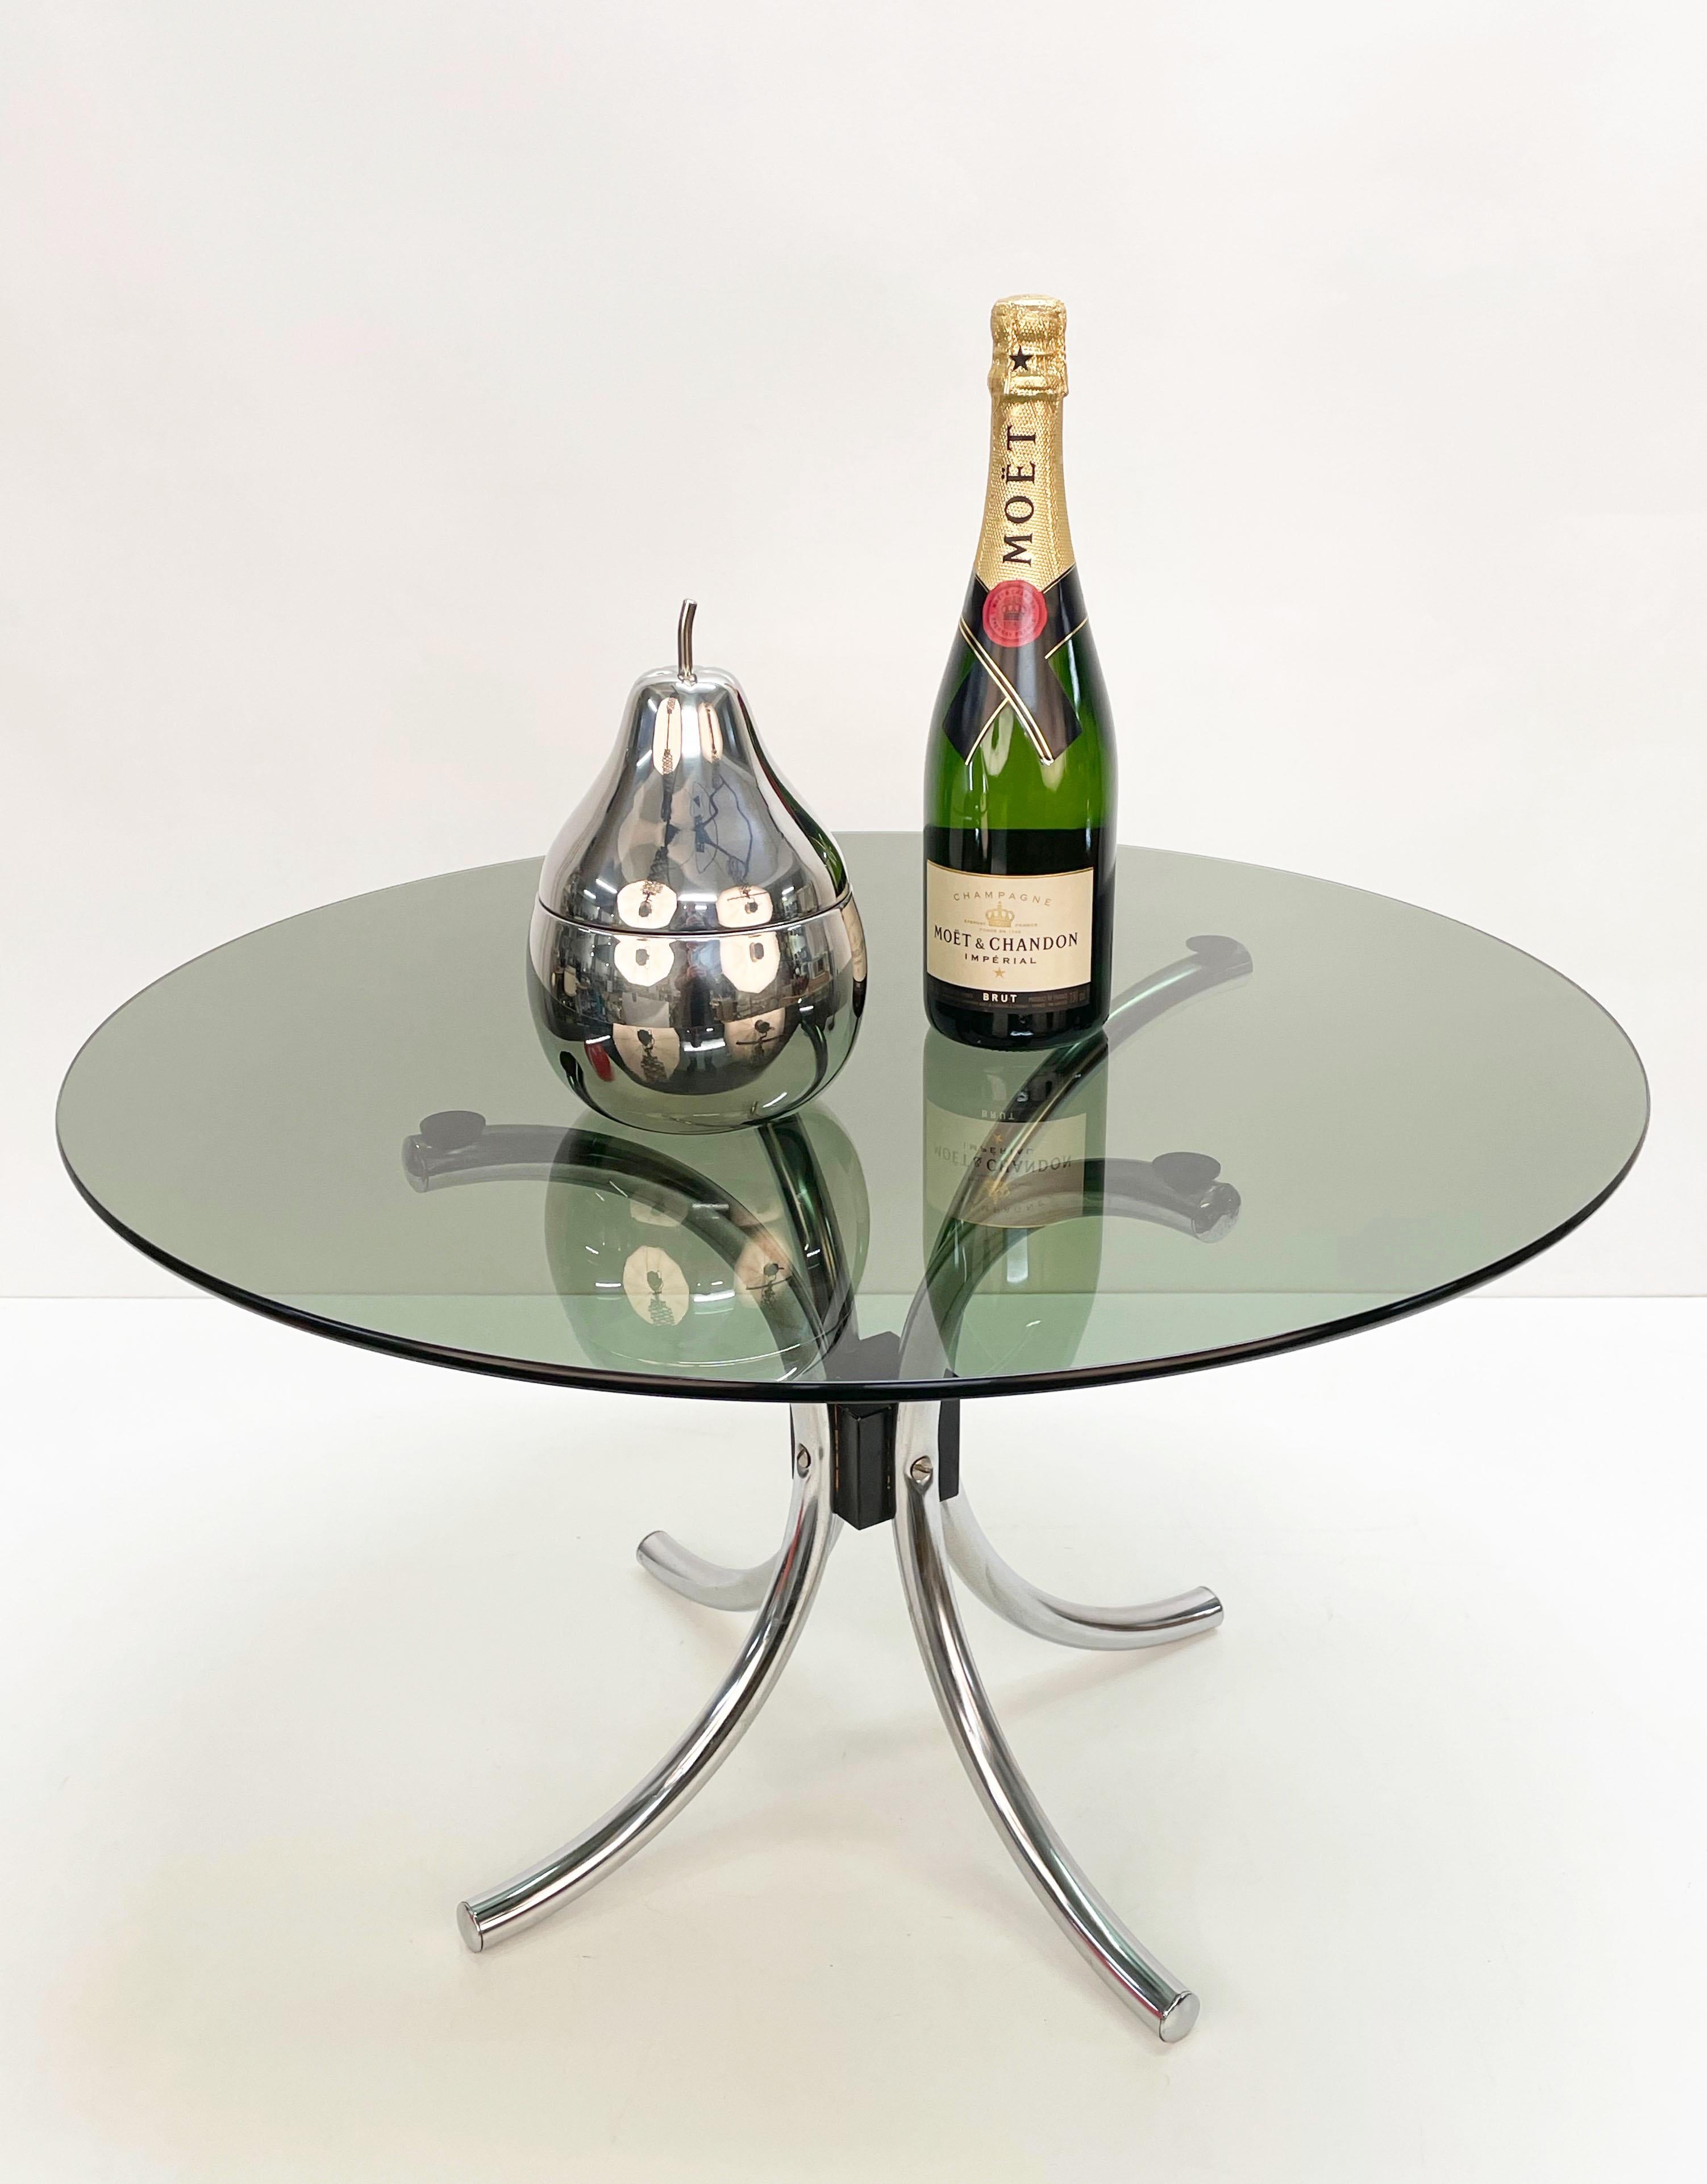 Midcentury Chromed Steel Italian Coffee Table with Smoked Glass Round Top, 1960s For Sale 4